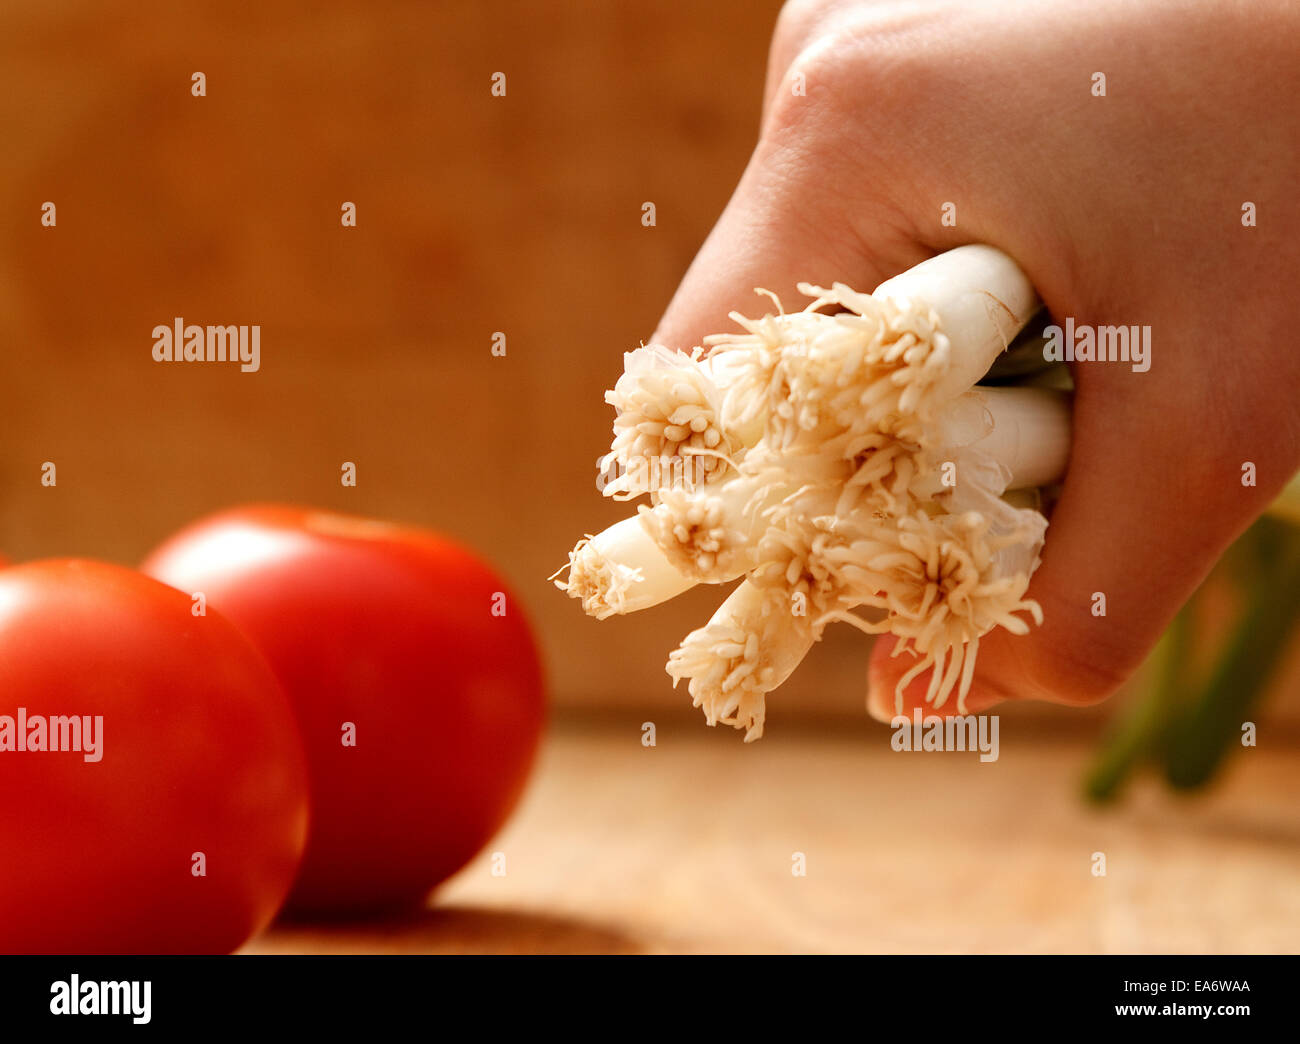 Hand gripping a bunch of green onions Stock Photo